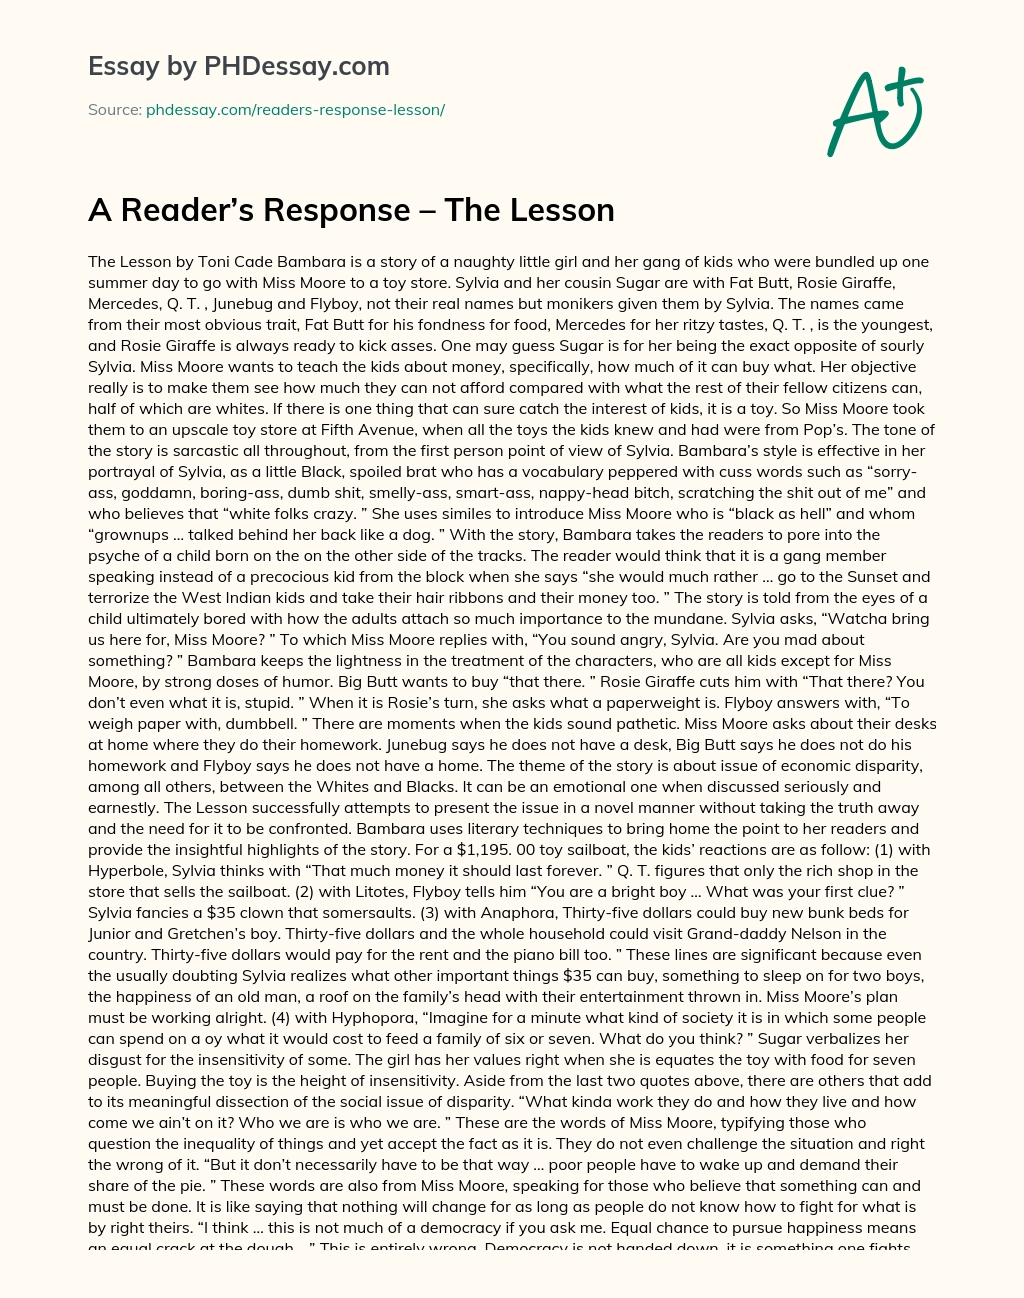 A Reader’s Response – The Lesson essay